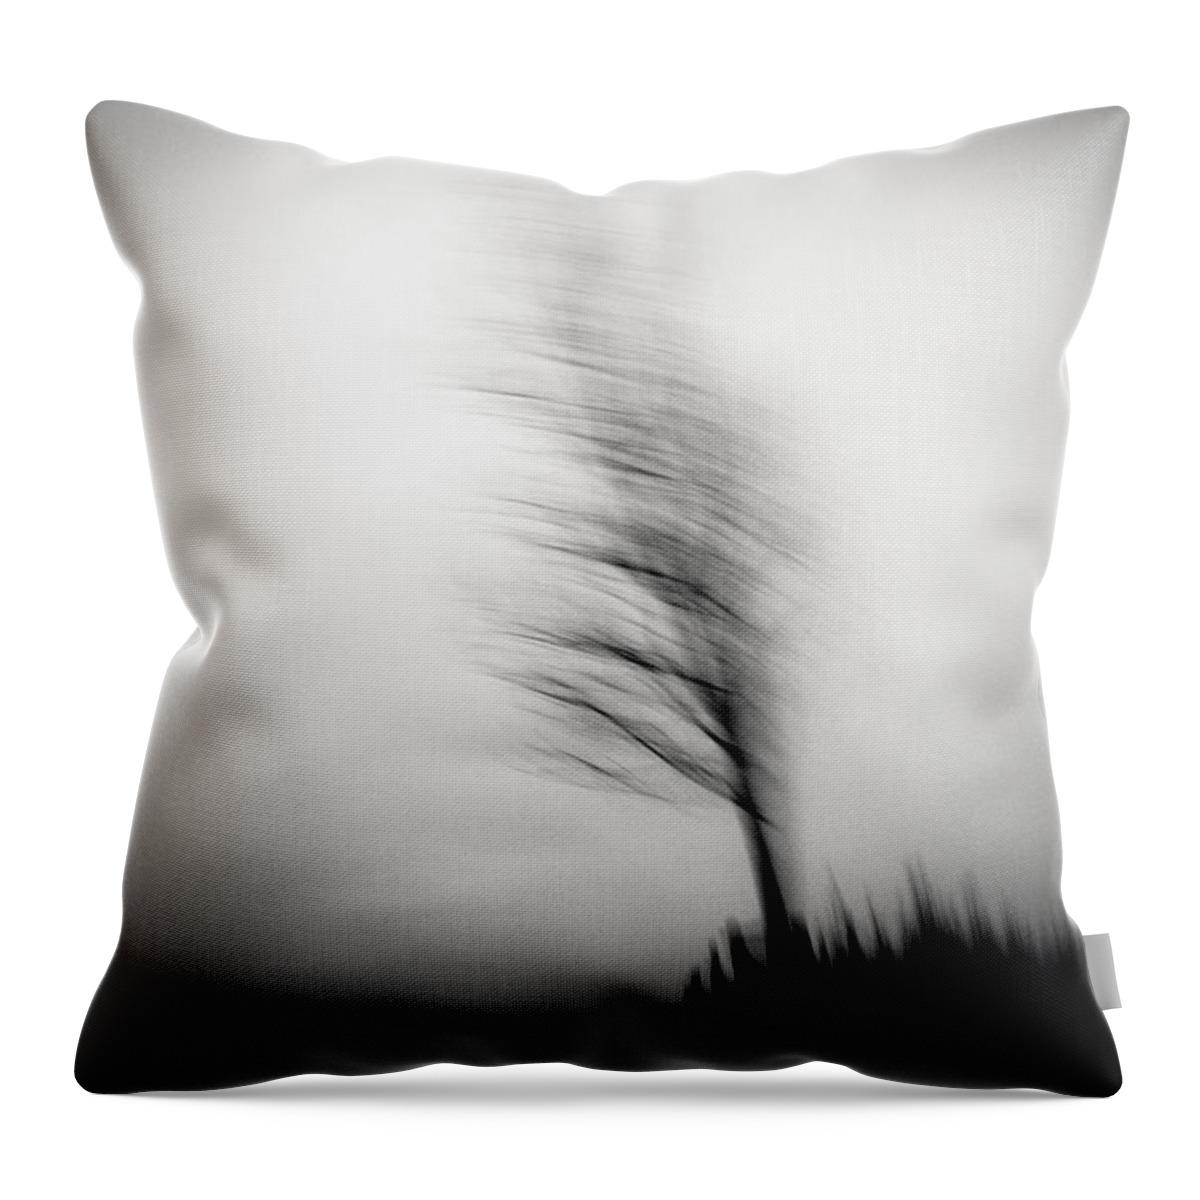 Tree Throw Pillow featuring the photograph Shadow Dancer by Dorit Fuhg